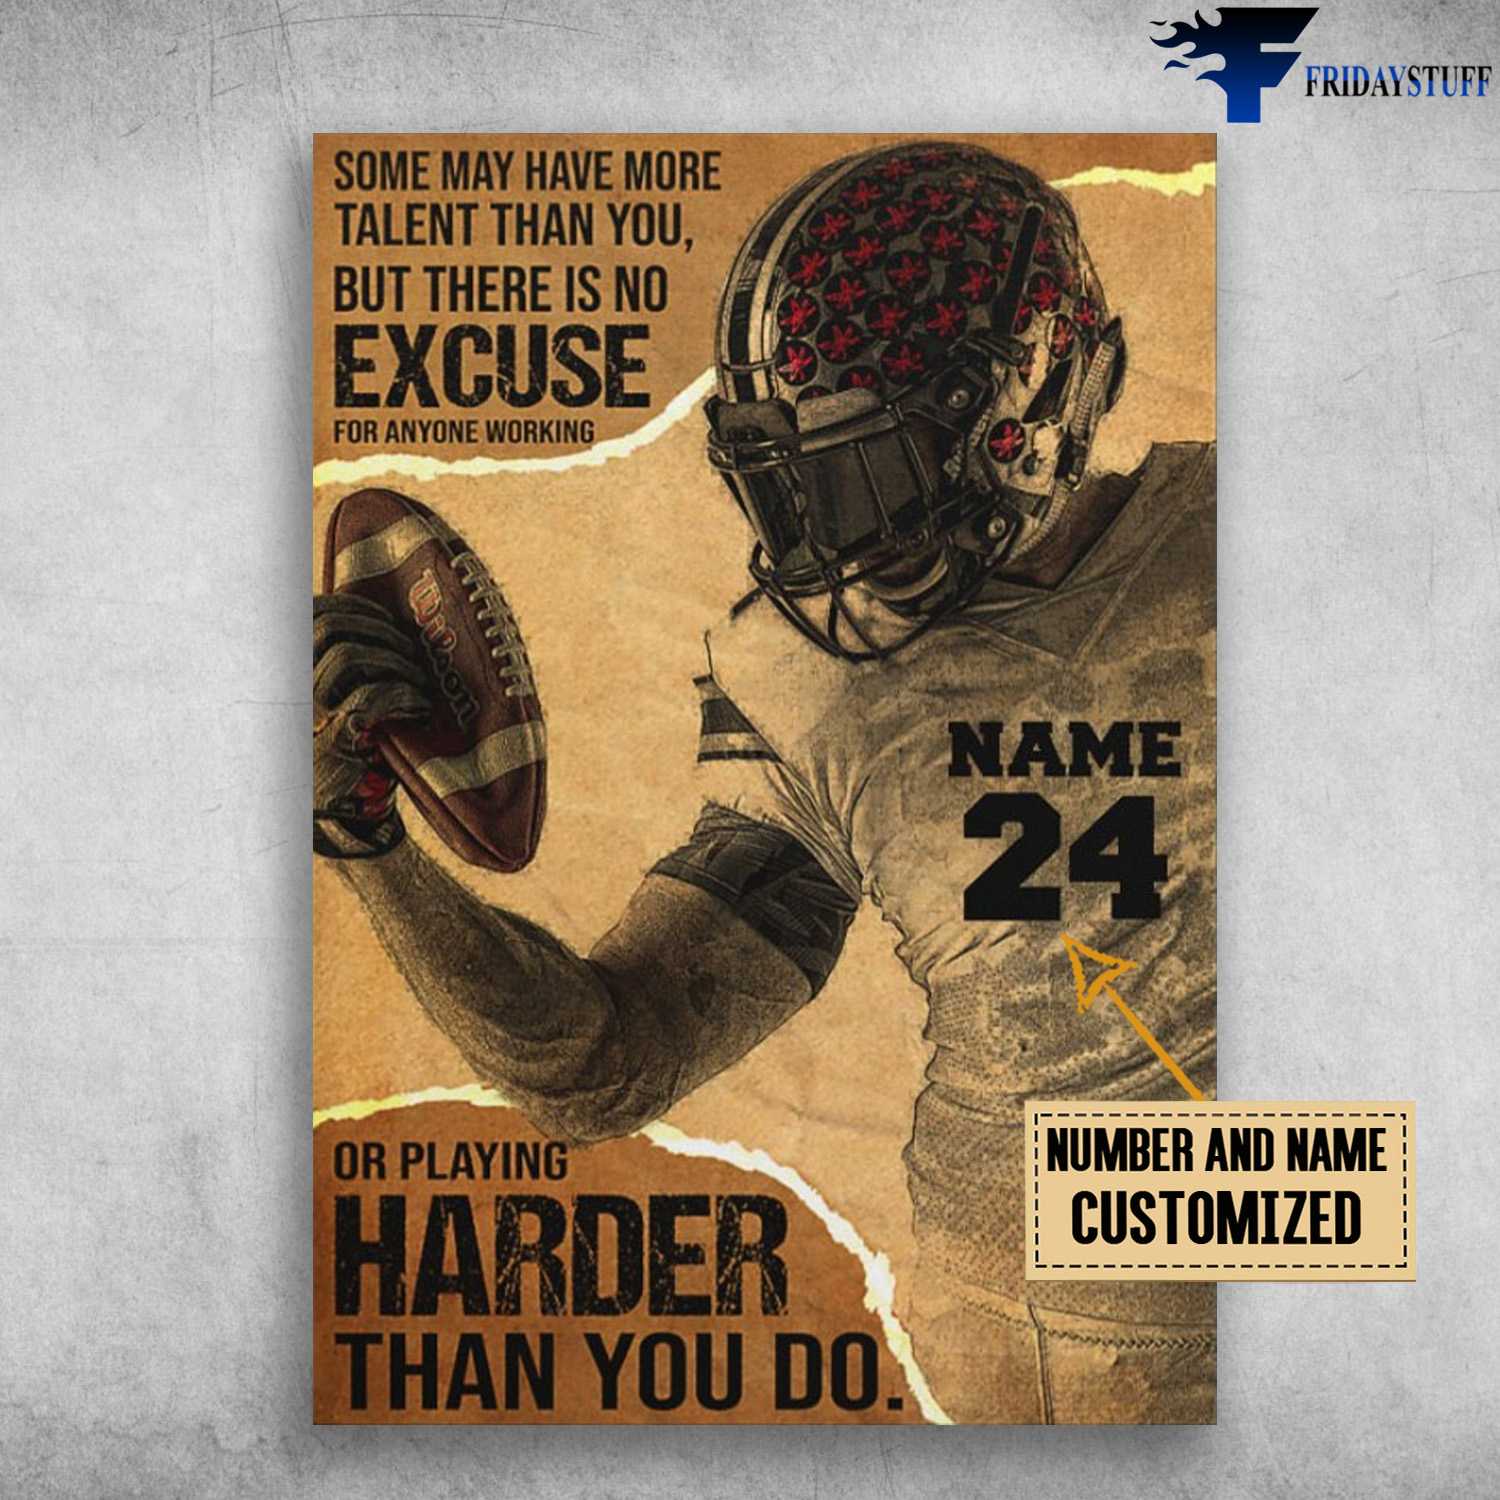 Football Player, Football Lover, Some May Have More Talent Than You, But There Is No Excuse, For Anyone Working, Or Playing Harder Than You Do